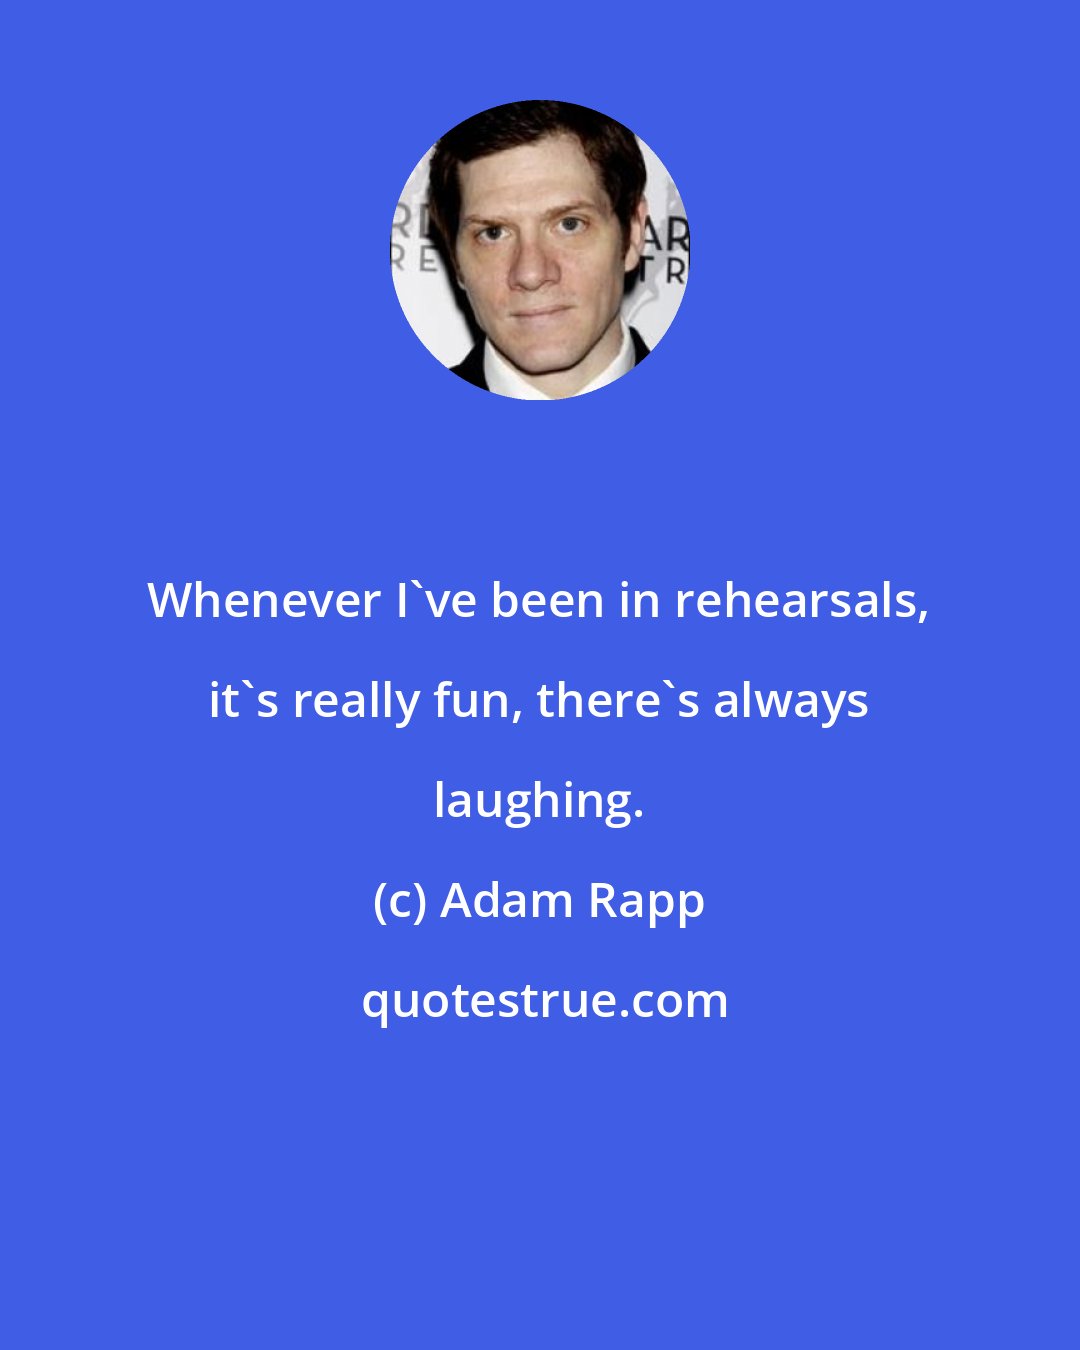 Adam Rapp: Whenever I've been in rehearsals, it's really fun, there's always laughing.